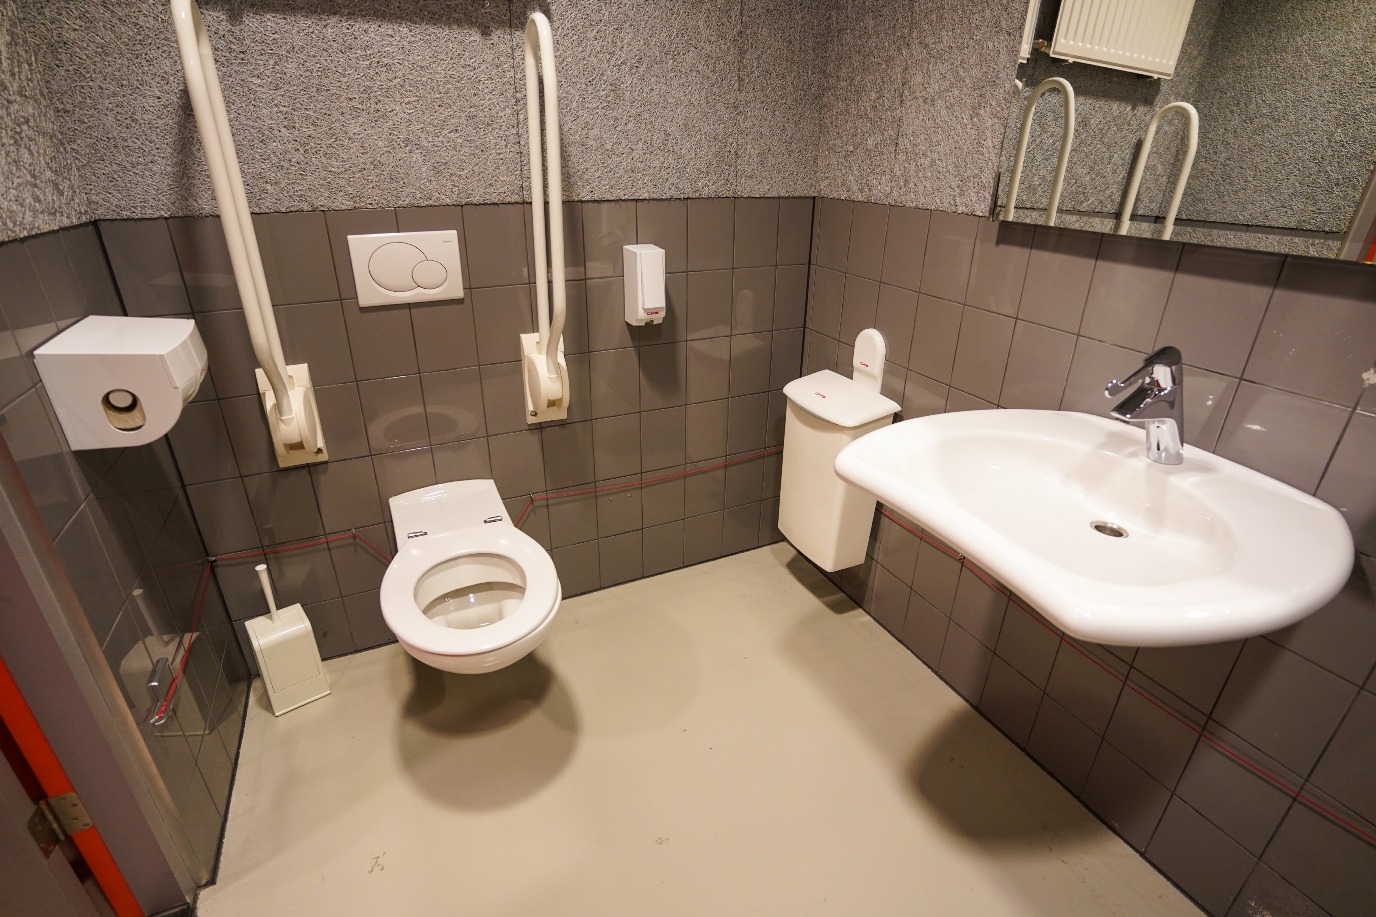 Wheelchair-friendly toilet in exam section building